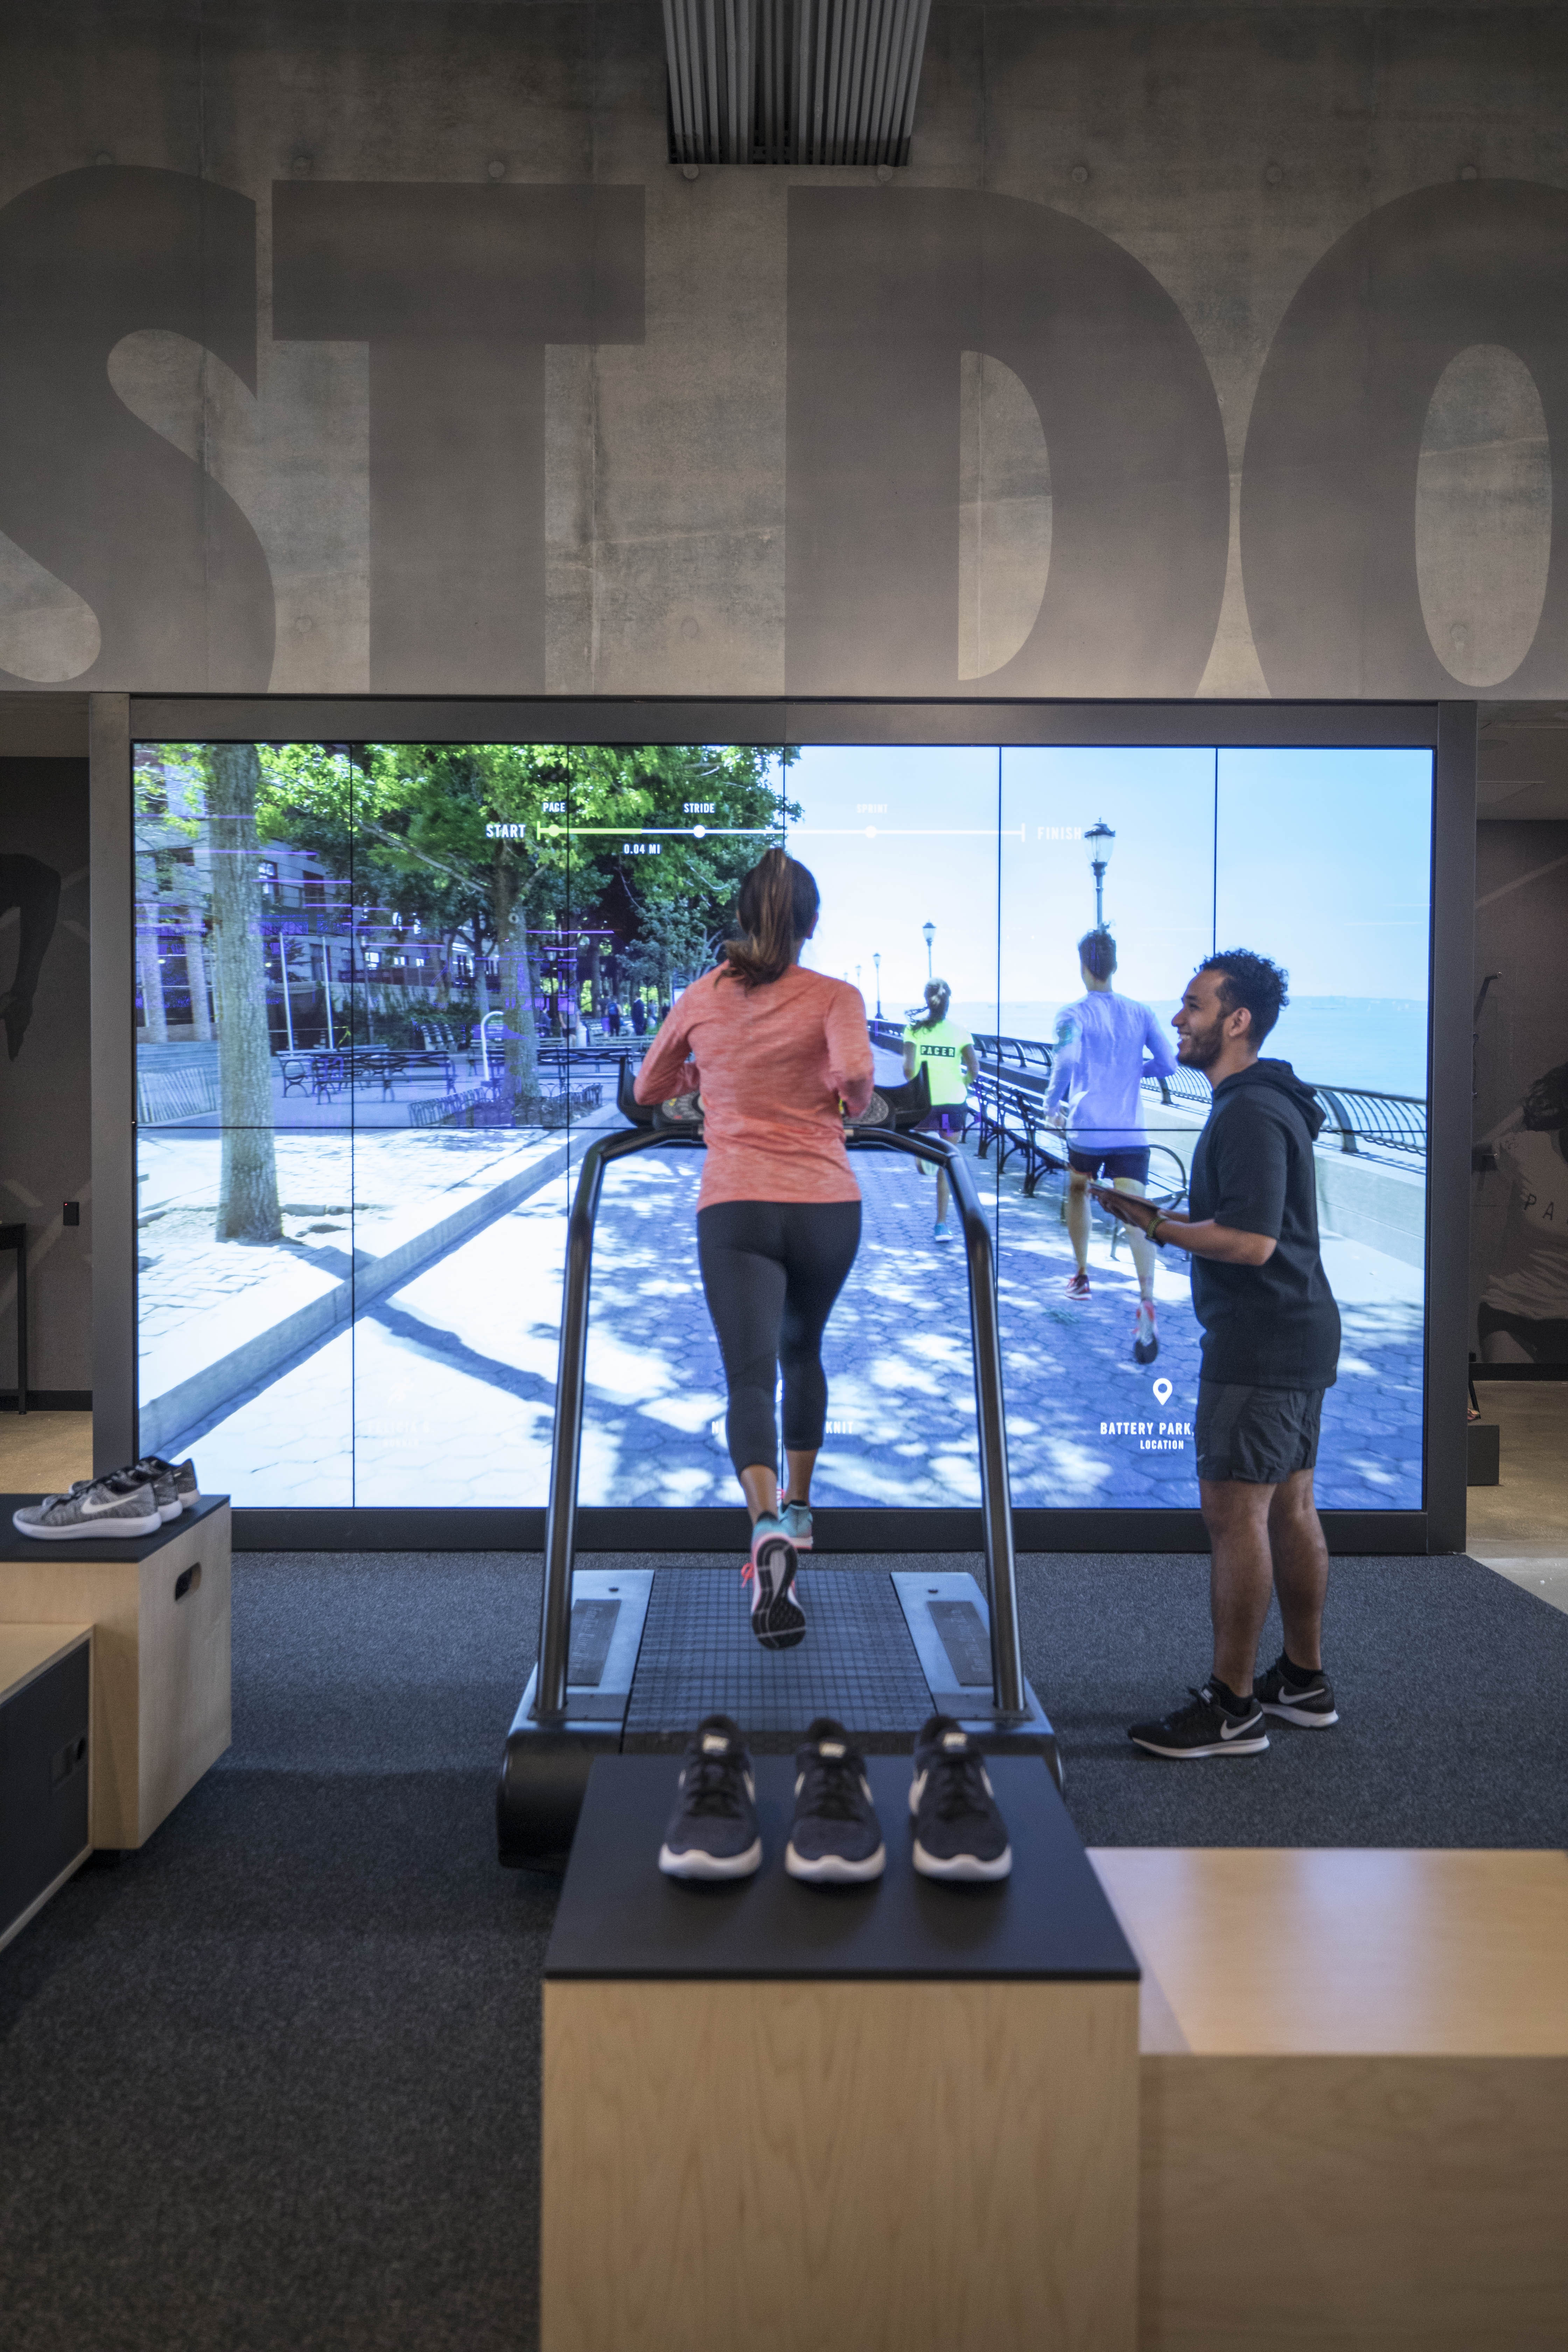 the-nike-running-trial-zone-located-on-the-first-floor-allows-consumers-to-test-shoes-on-a-treadmill-surrounded-by-two-cameras-capturing-data-from-their-run